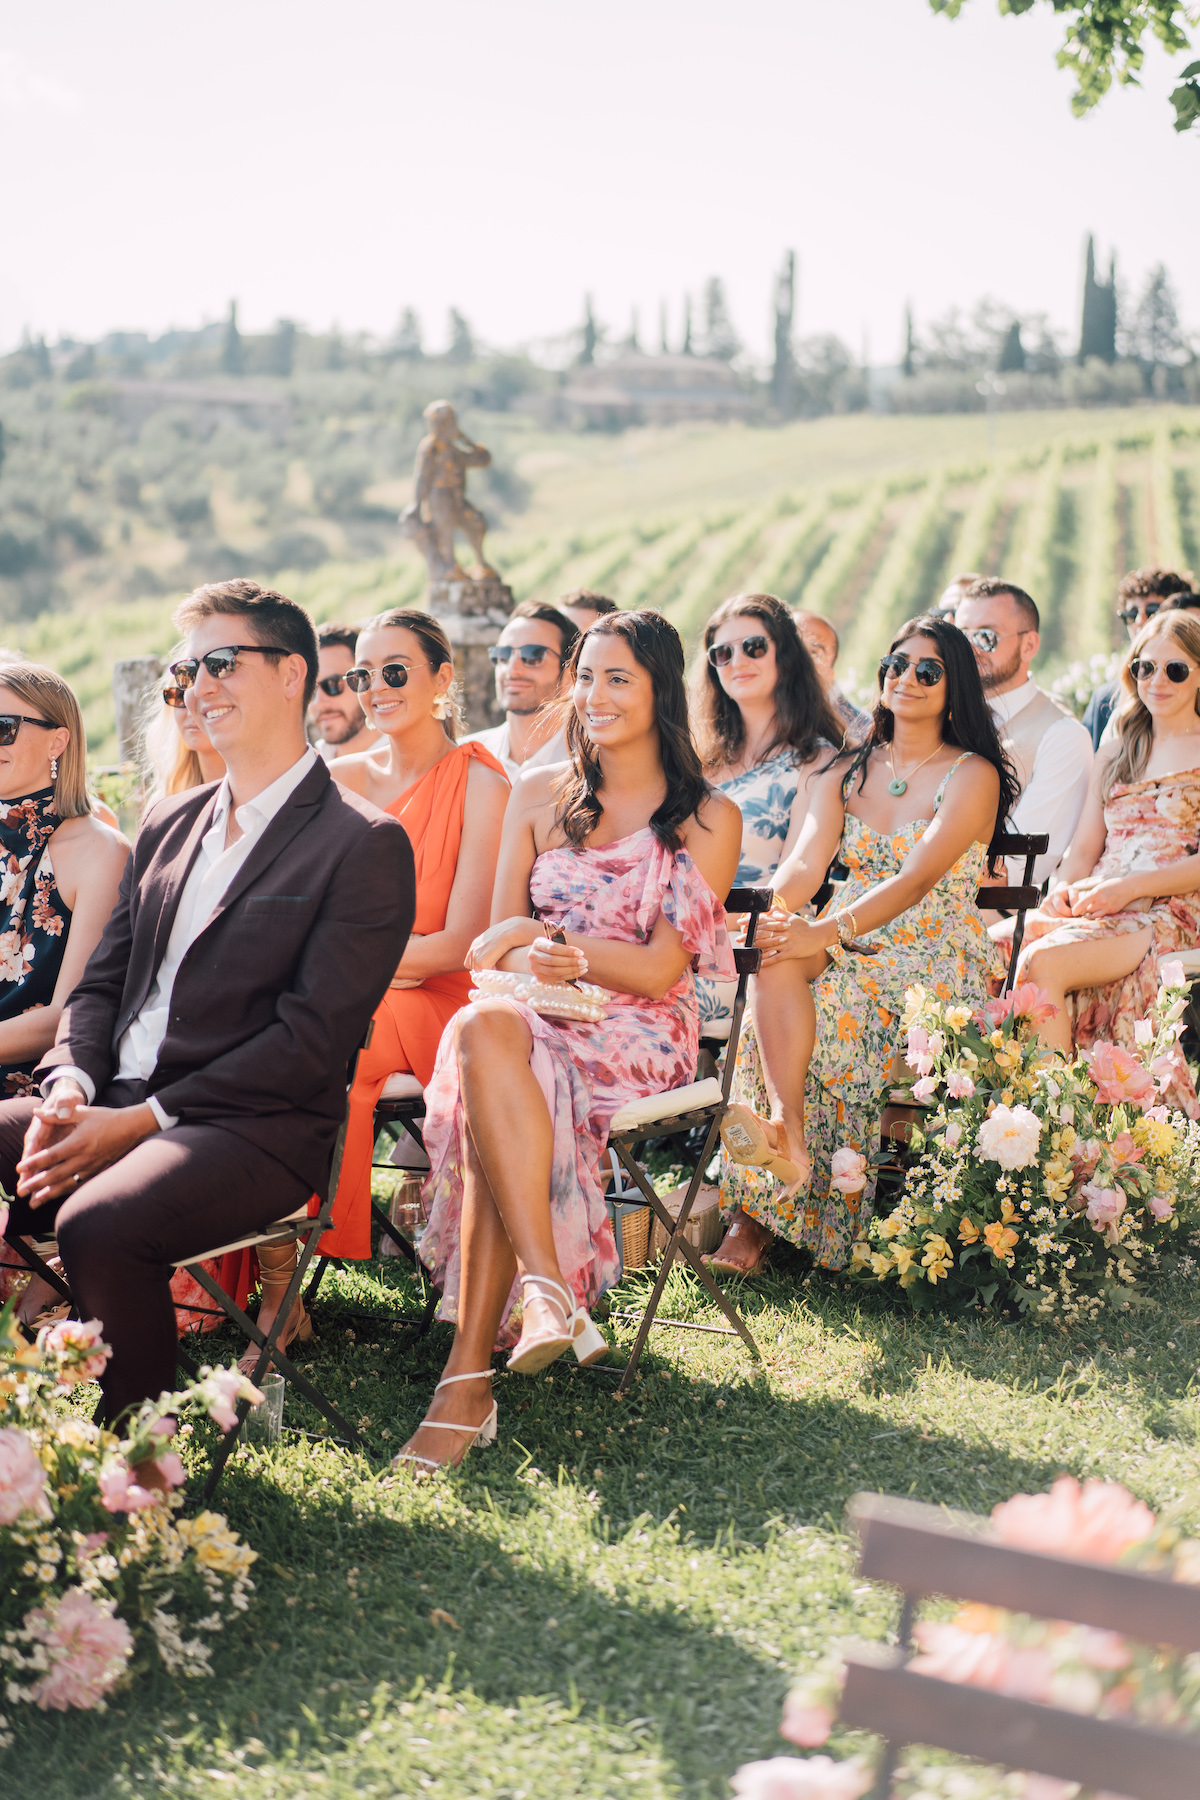 wedding guests at ceremony in Italian countryside